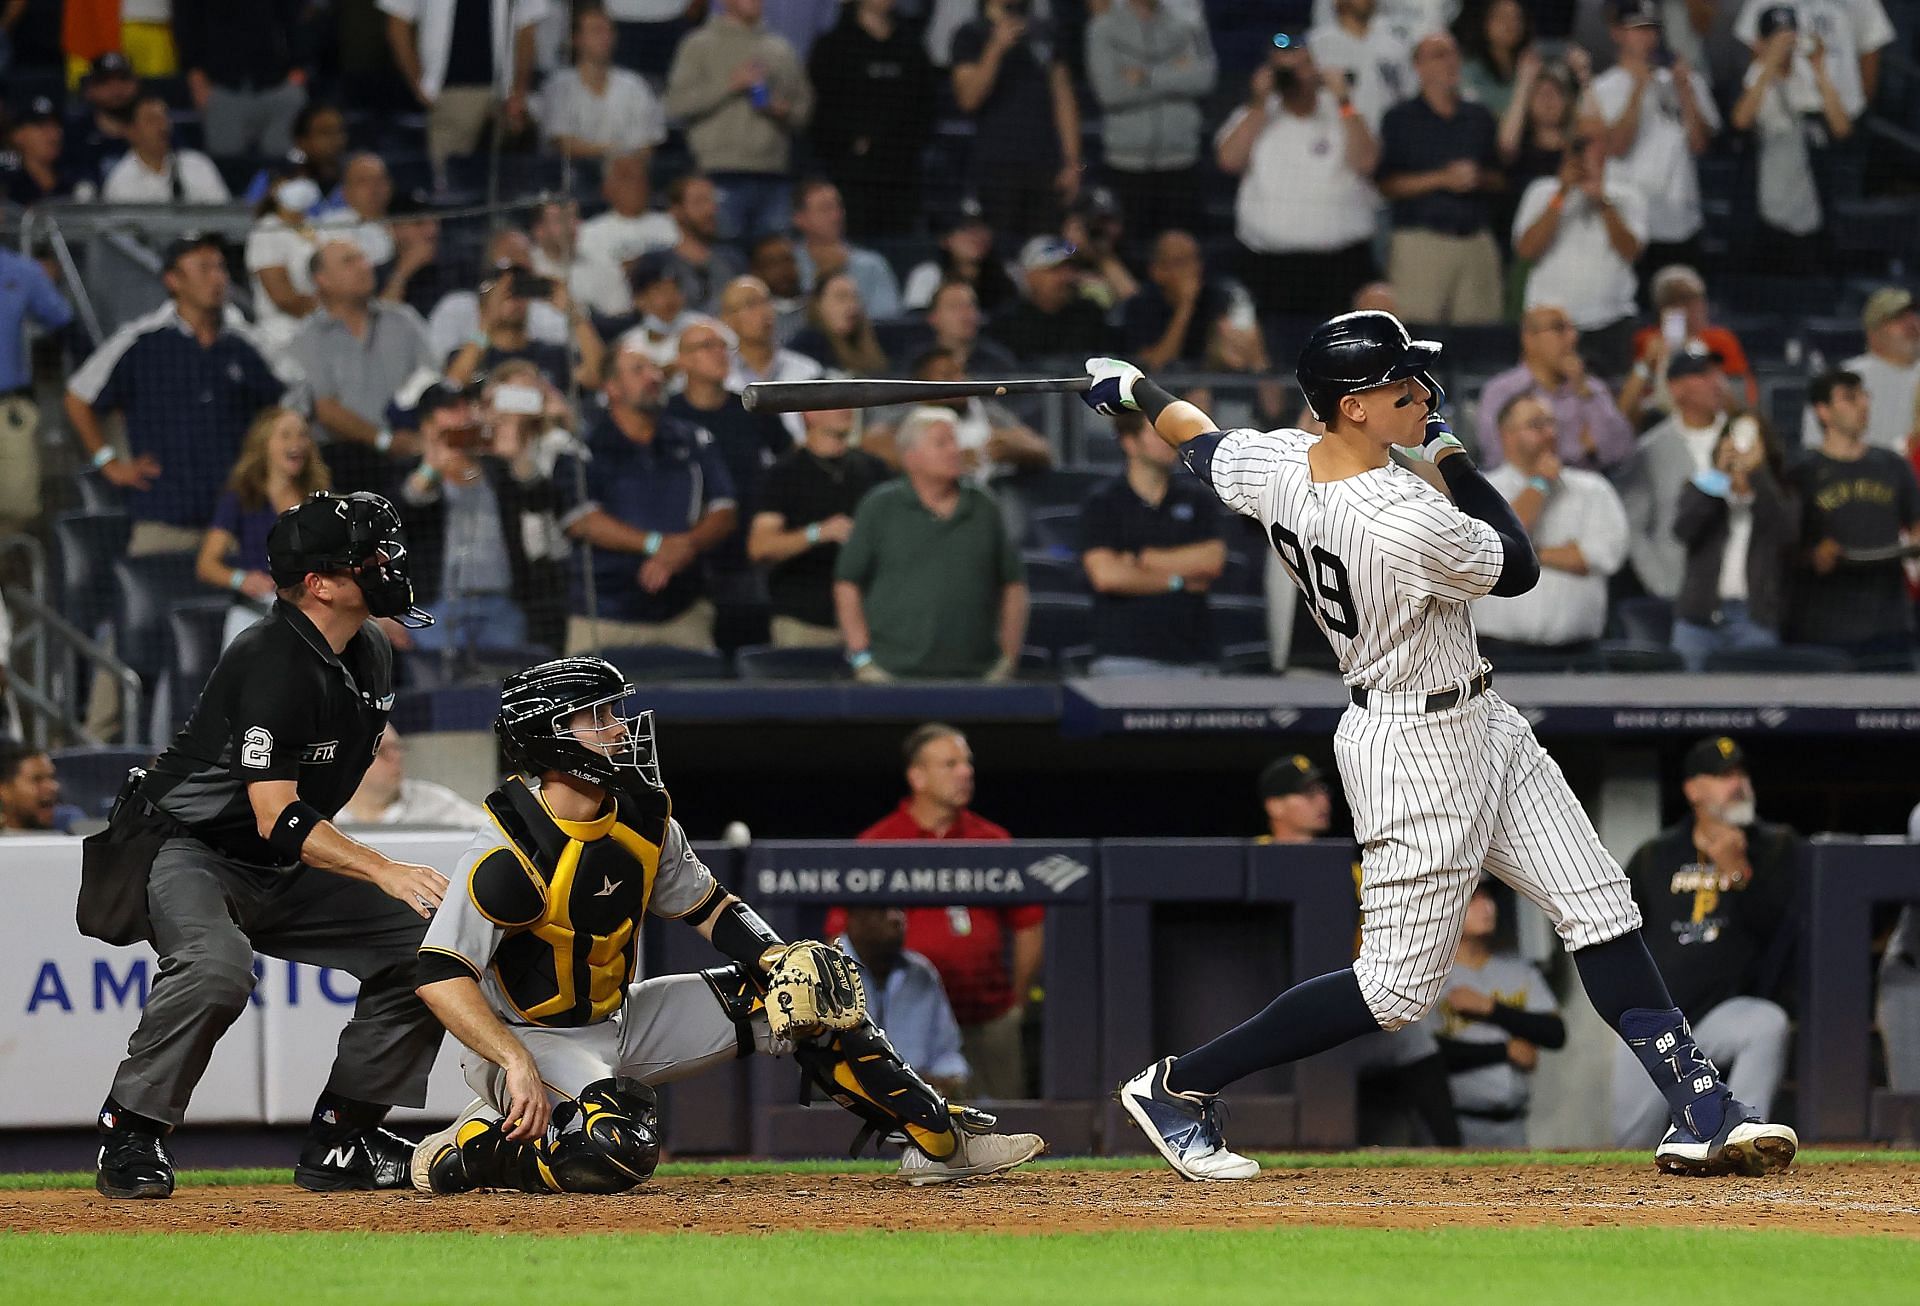 Aaron Judge ties Babe Ruth with 60th home run, one shy of Maris's AL mark, New York Yankees